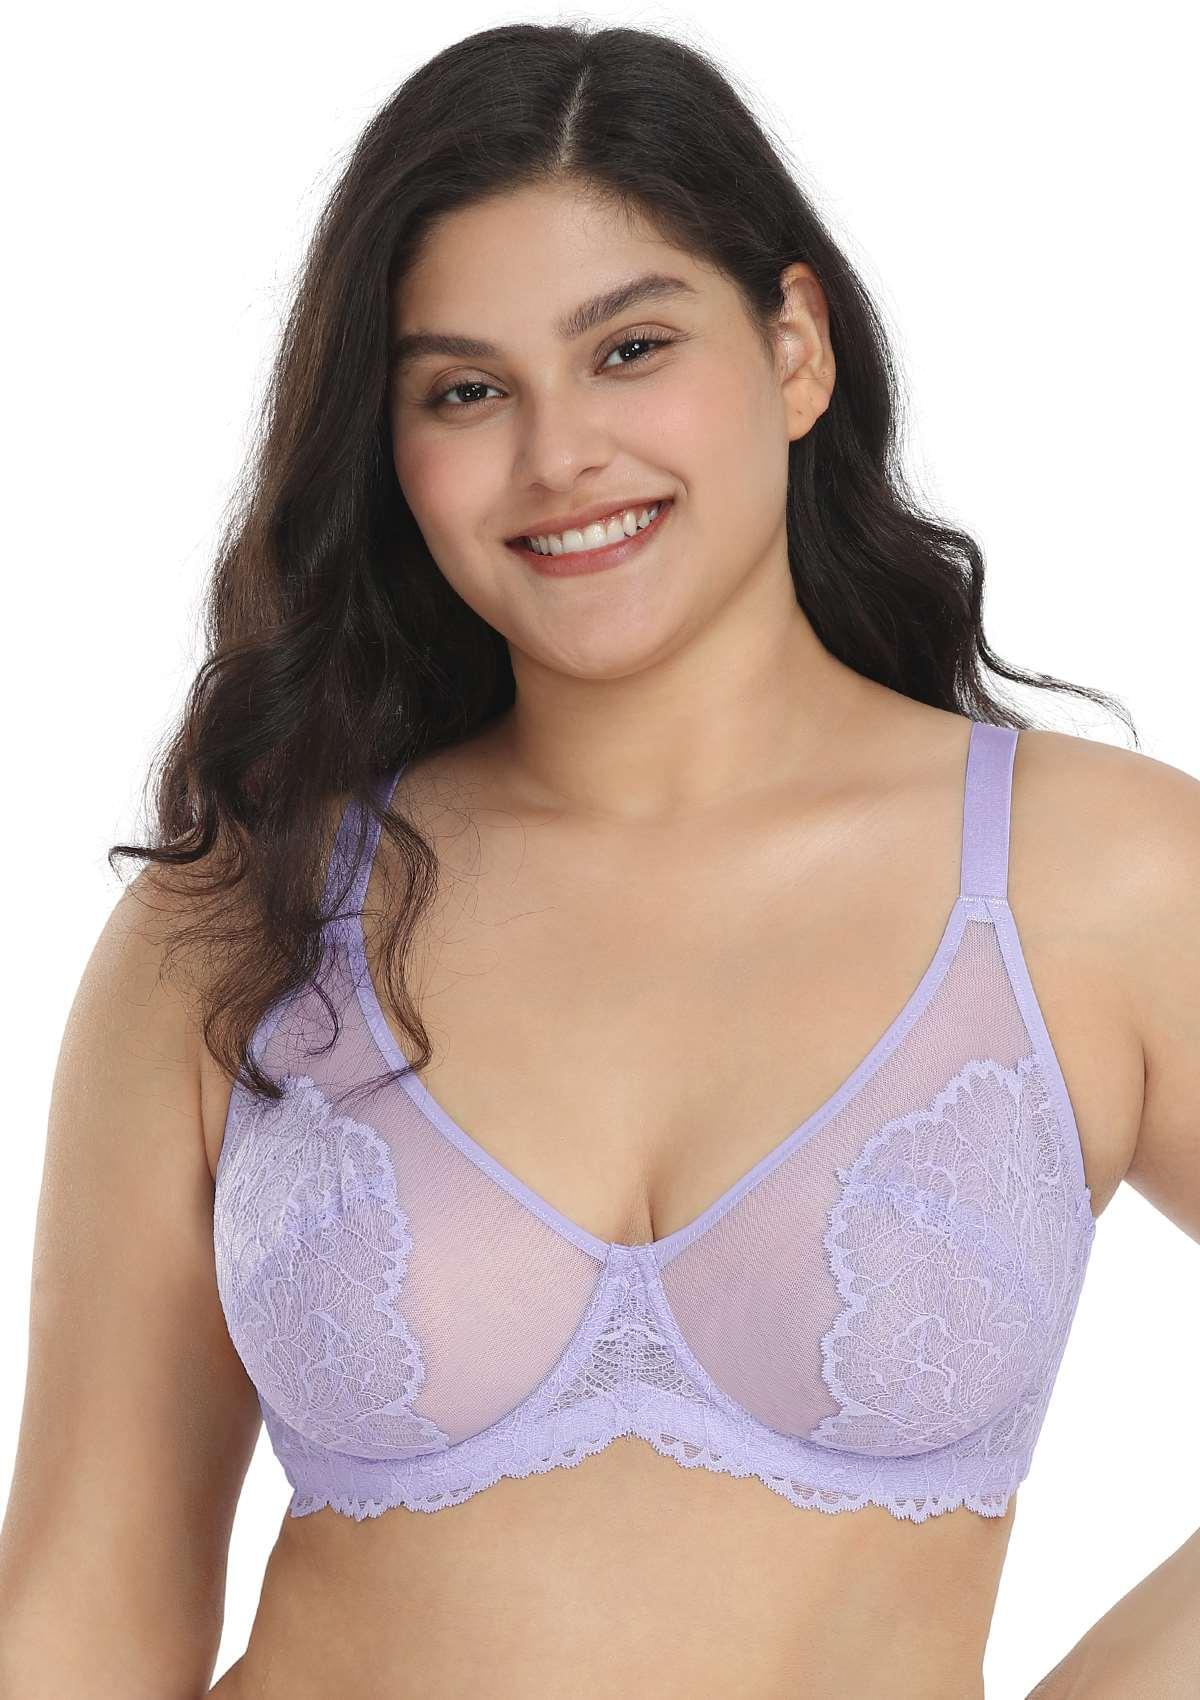 HSIA Blossom Transparent Lace Bra: Plus Size Wired Back Smoothing Bra - Light Purple / 44 / DD/E